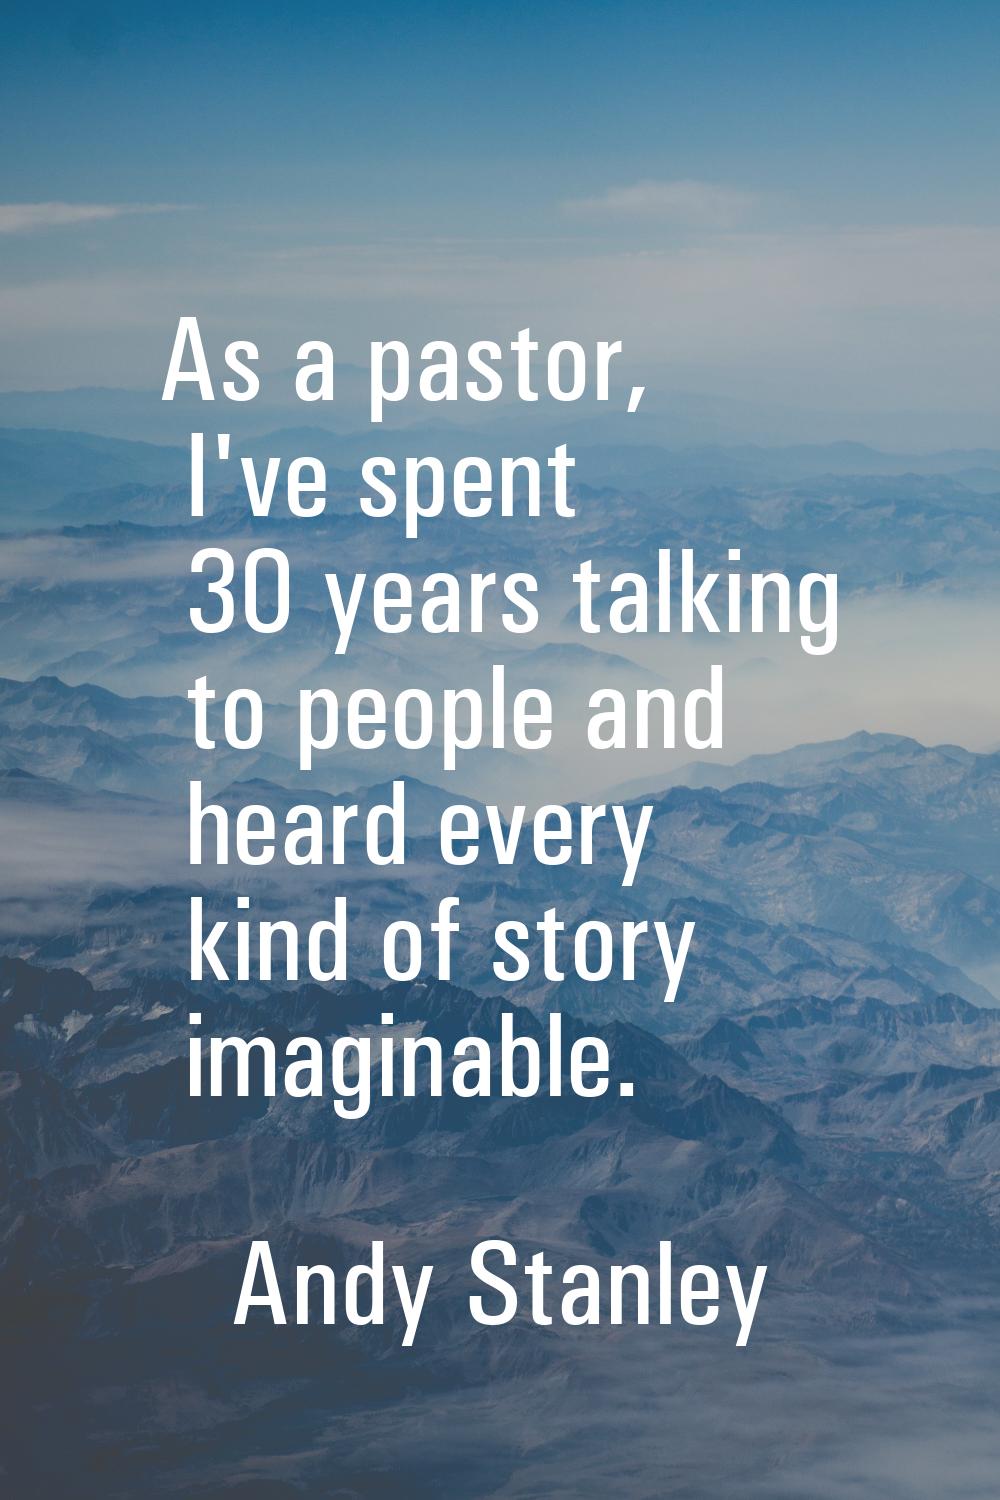 As a pastor, I've spent 30 years talking to people and heard every kind of story imaginable.